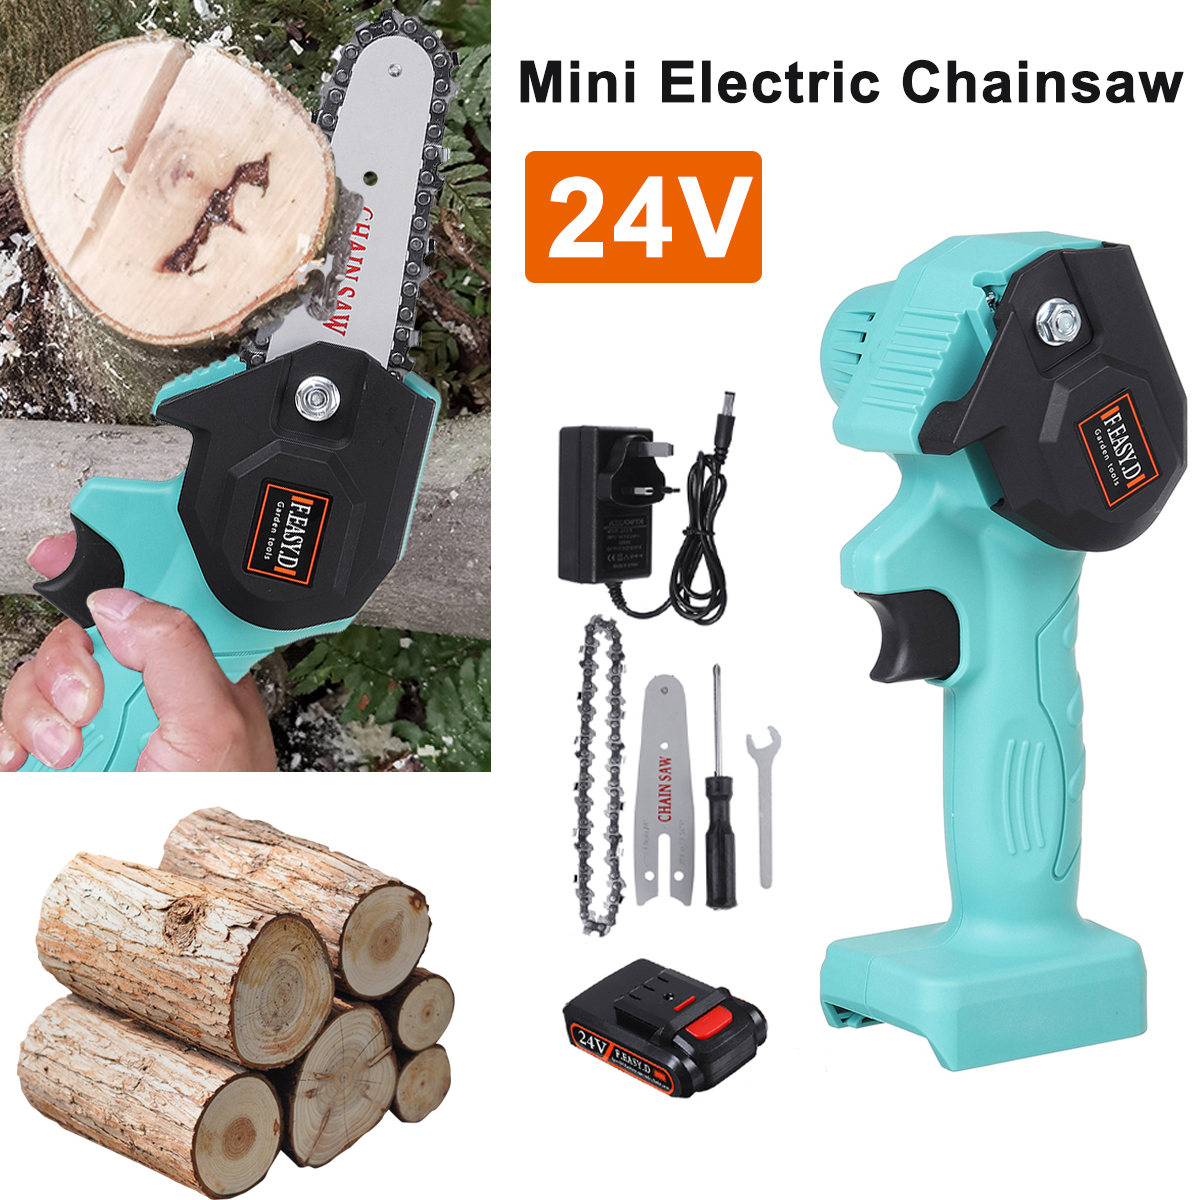 24V-550W-Rechargeable-Mini-Electric-Chainsaw-Handheld-Wood-Pruning-Saw-Kit-1777015-2